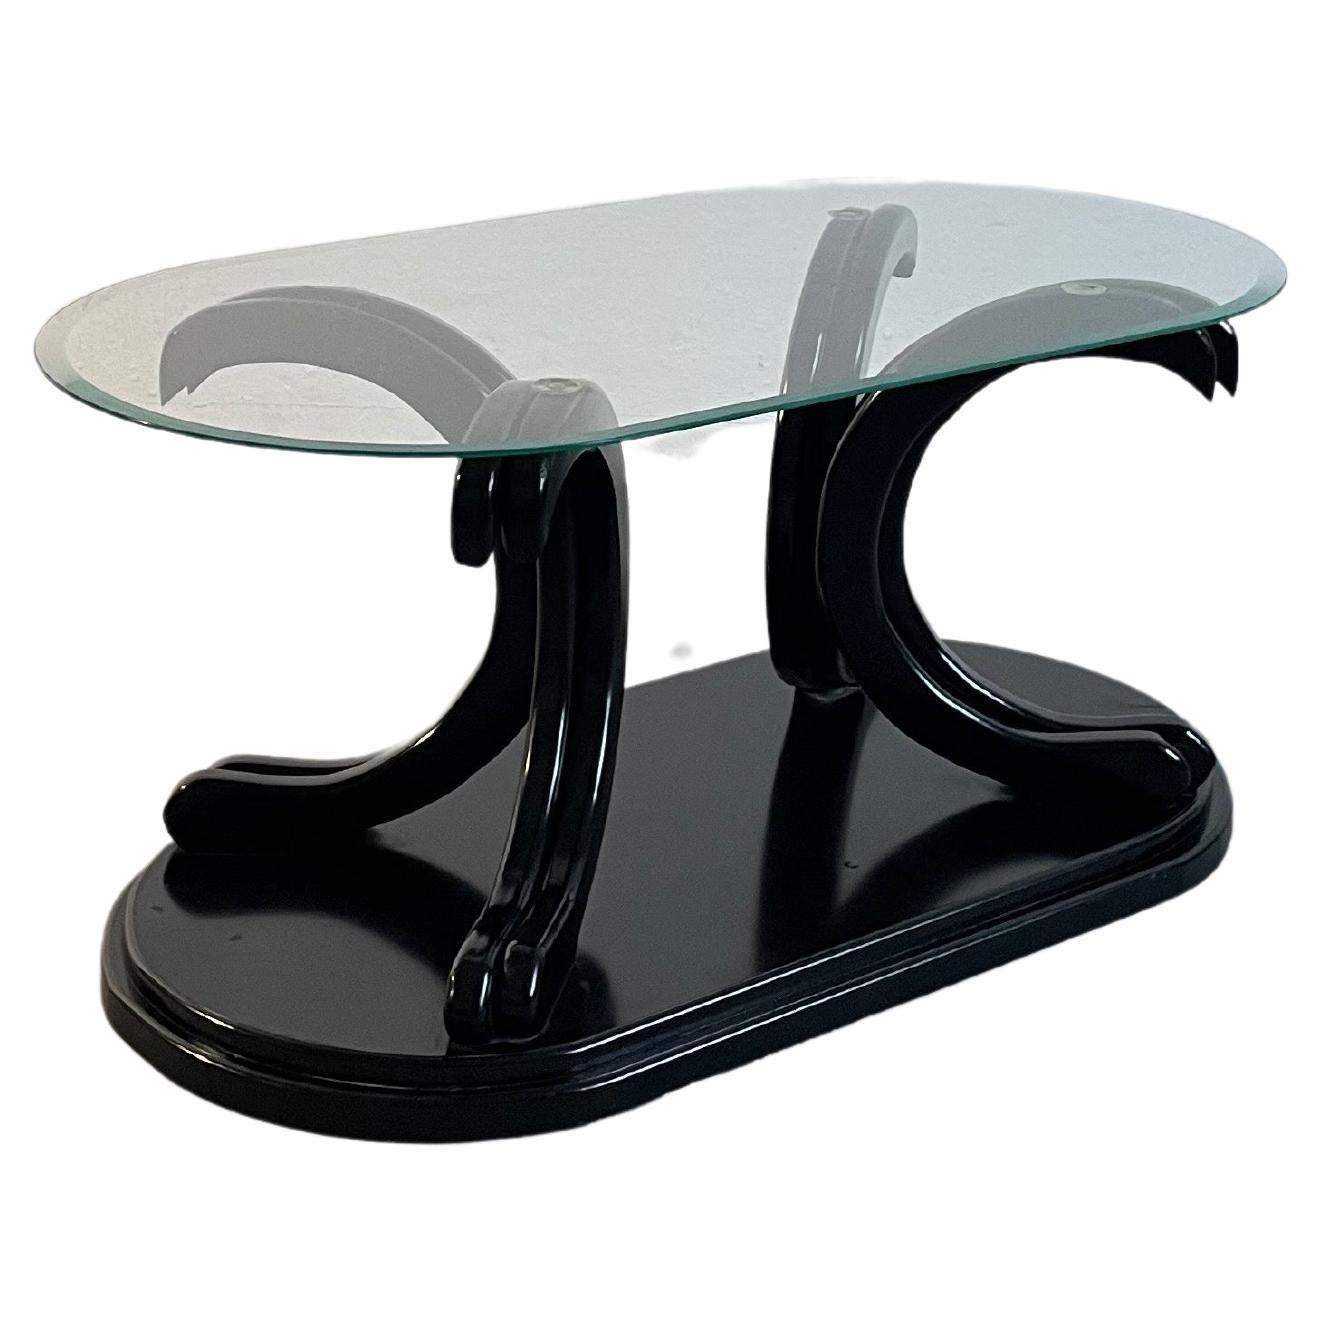 Vintage Postmodern Italian Coffee Table, Black Lacquered Wood and Glass, 1980s